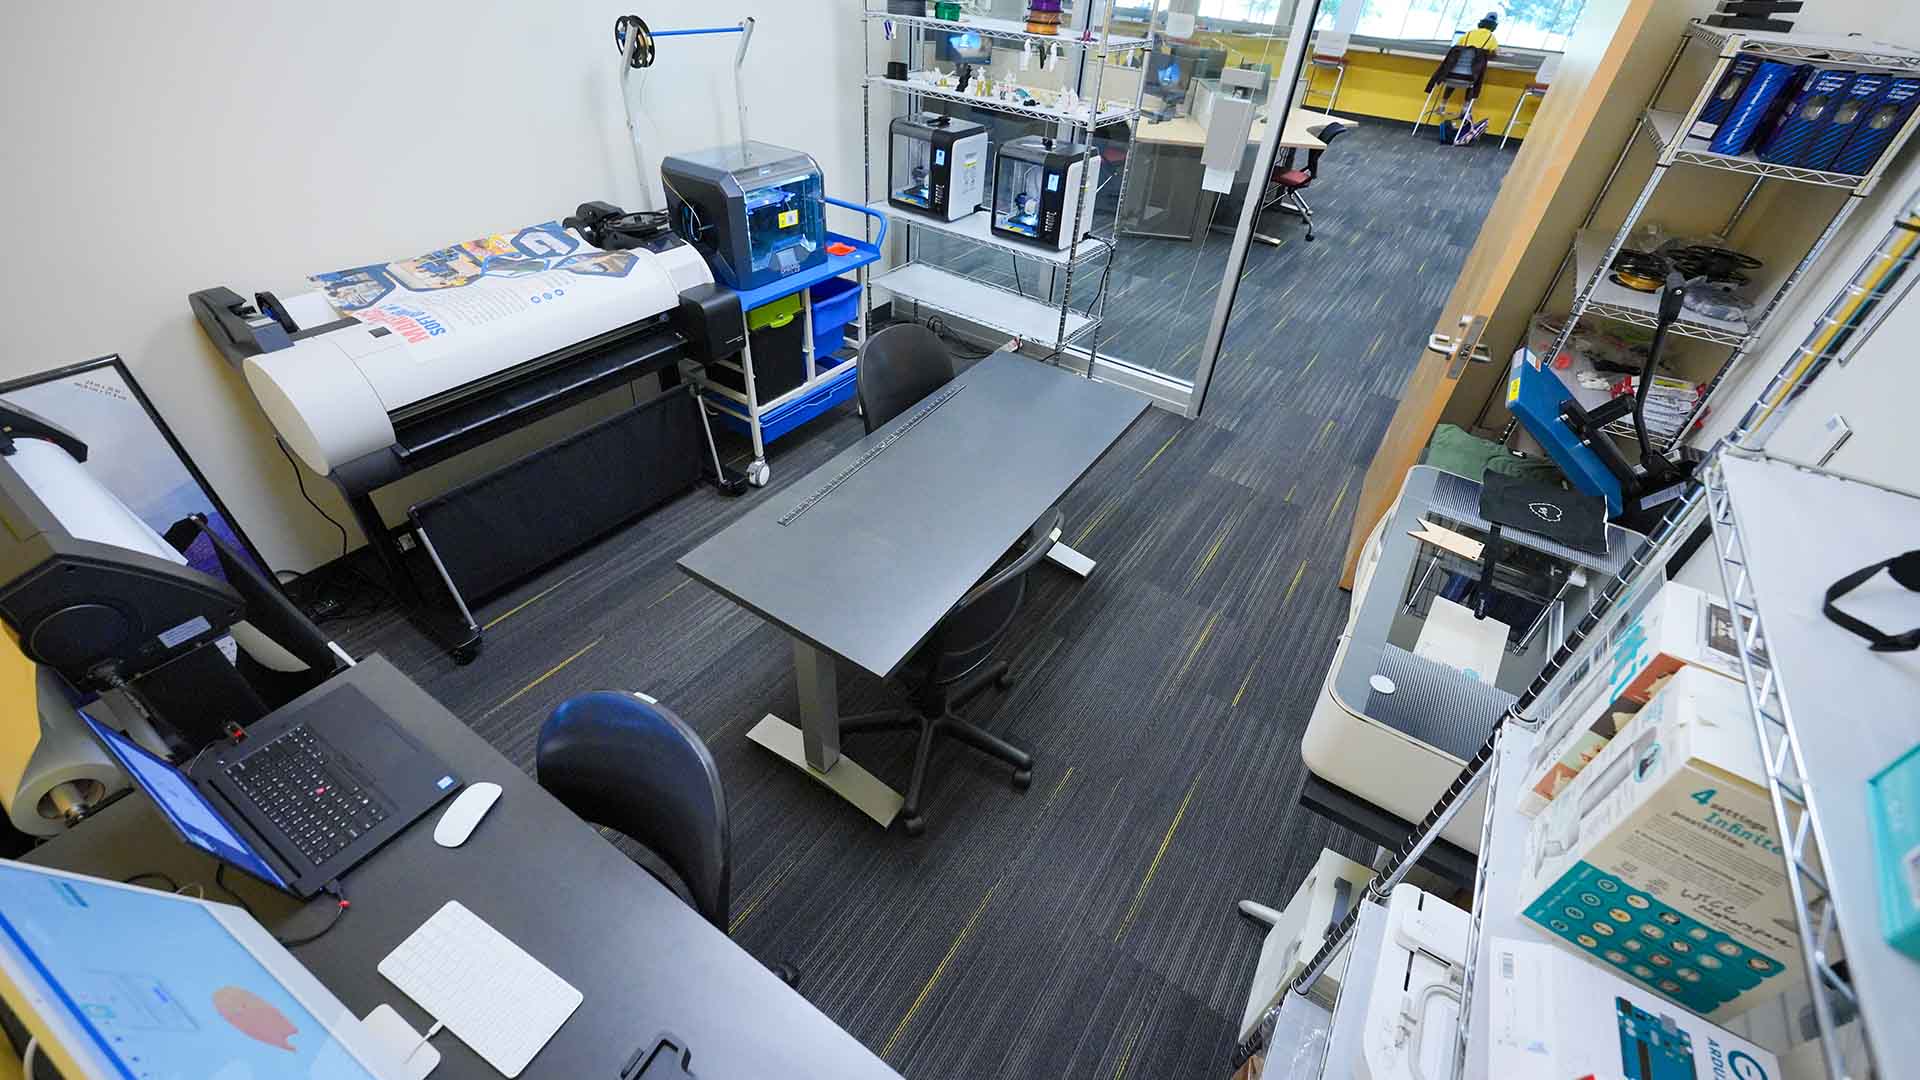 Scott Northern Wake Campus library makerspace